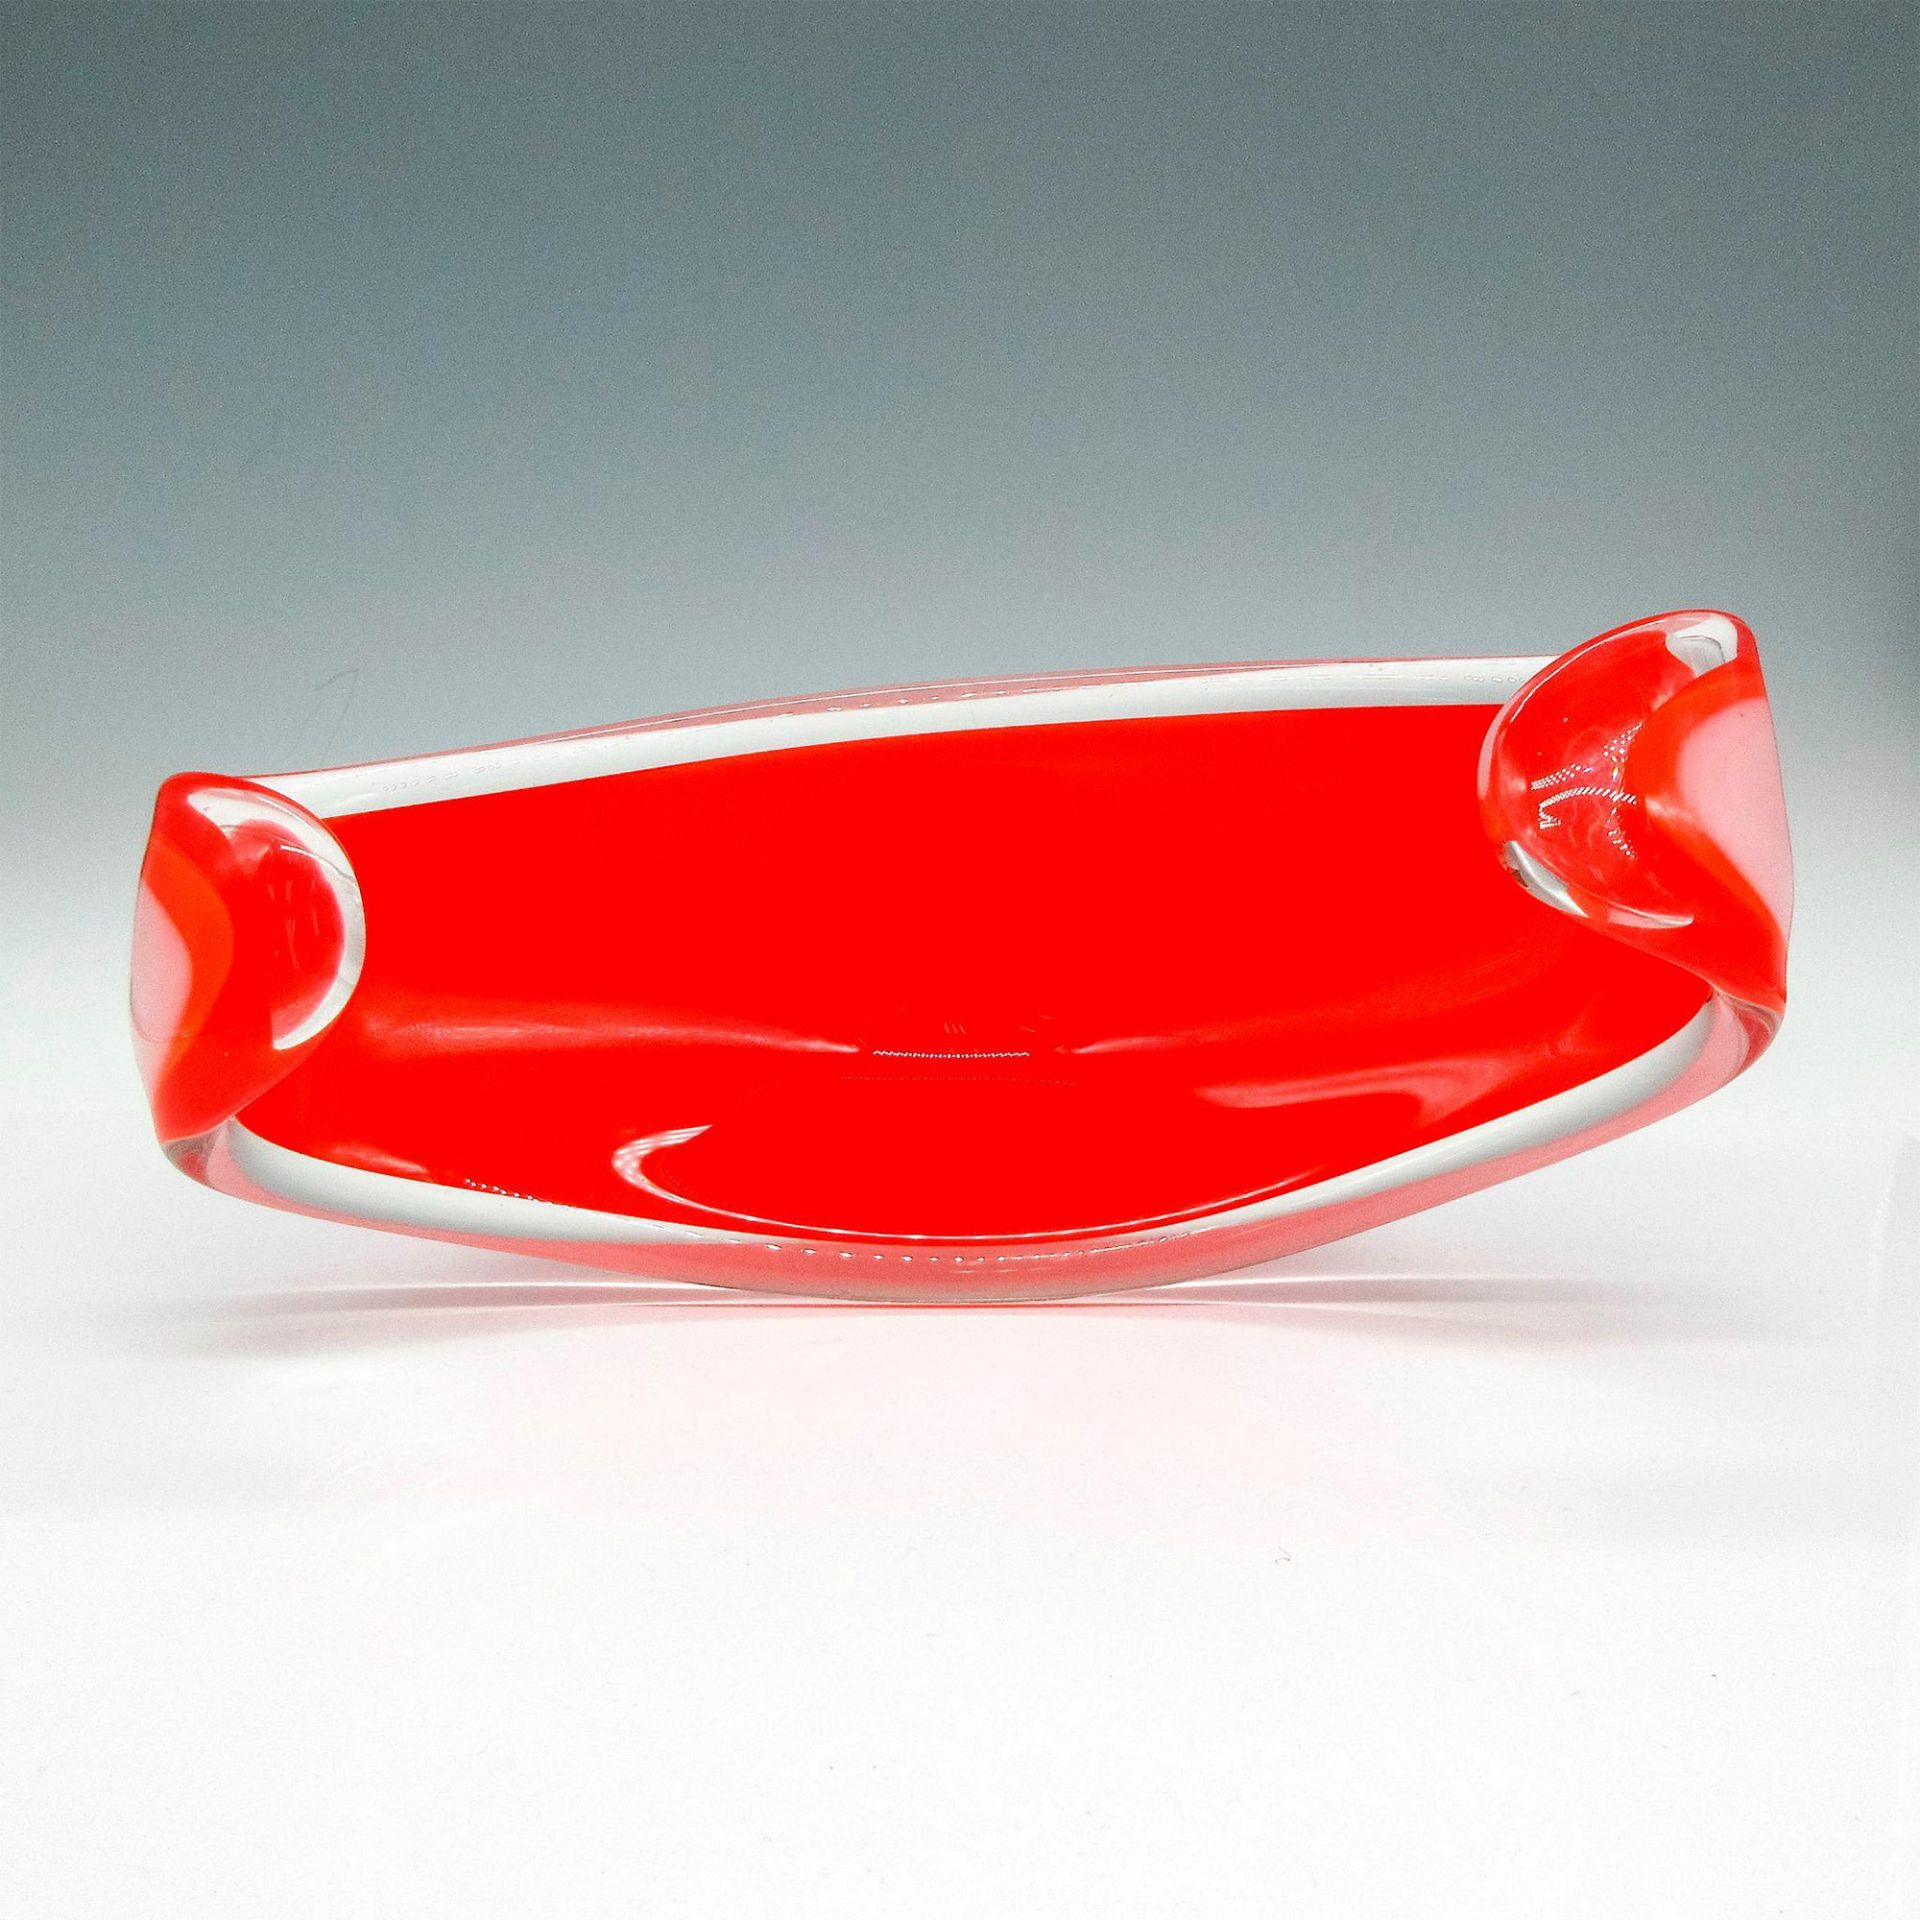 Flygsfors Mid-Century Modern Coquille Glass Bowl - Image 2 of 3